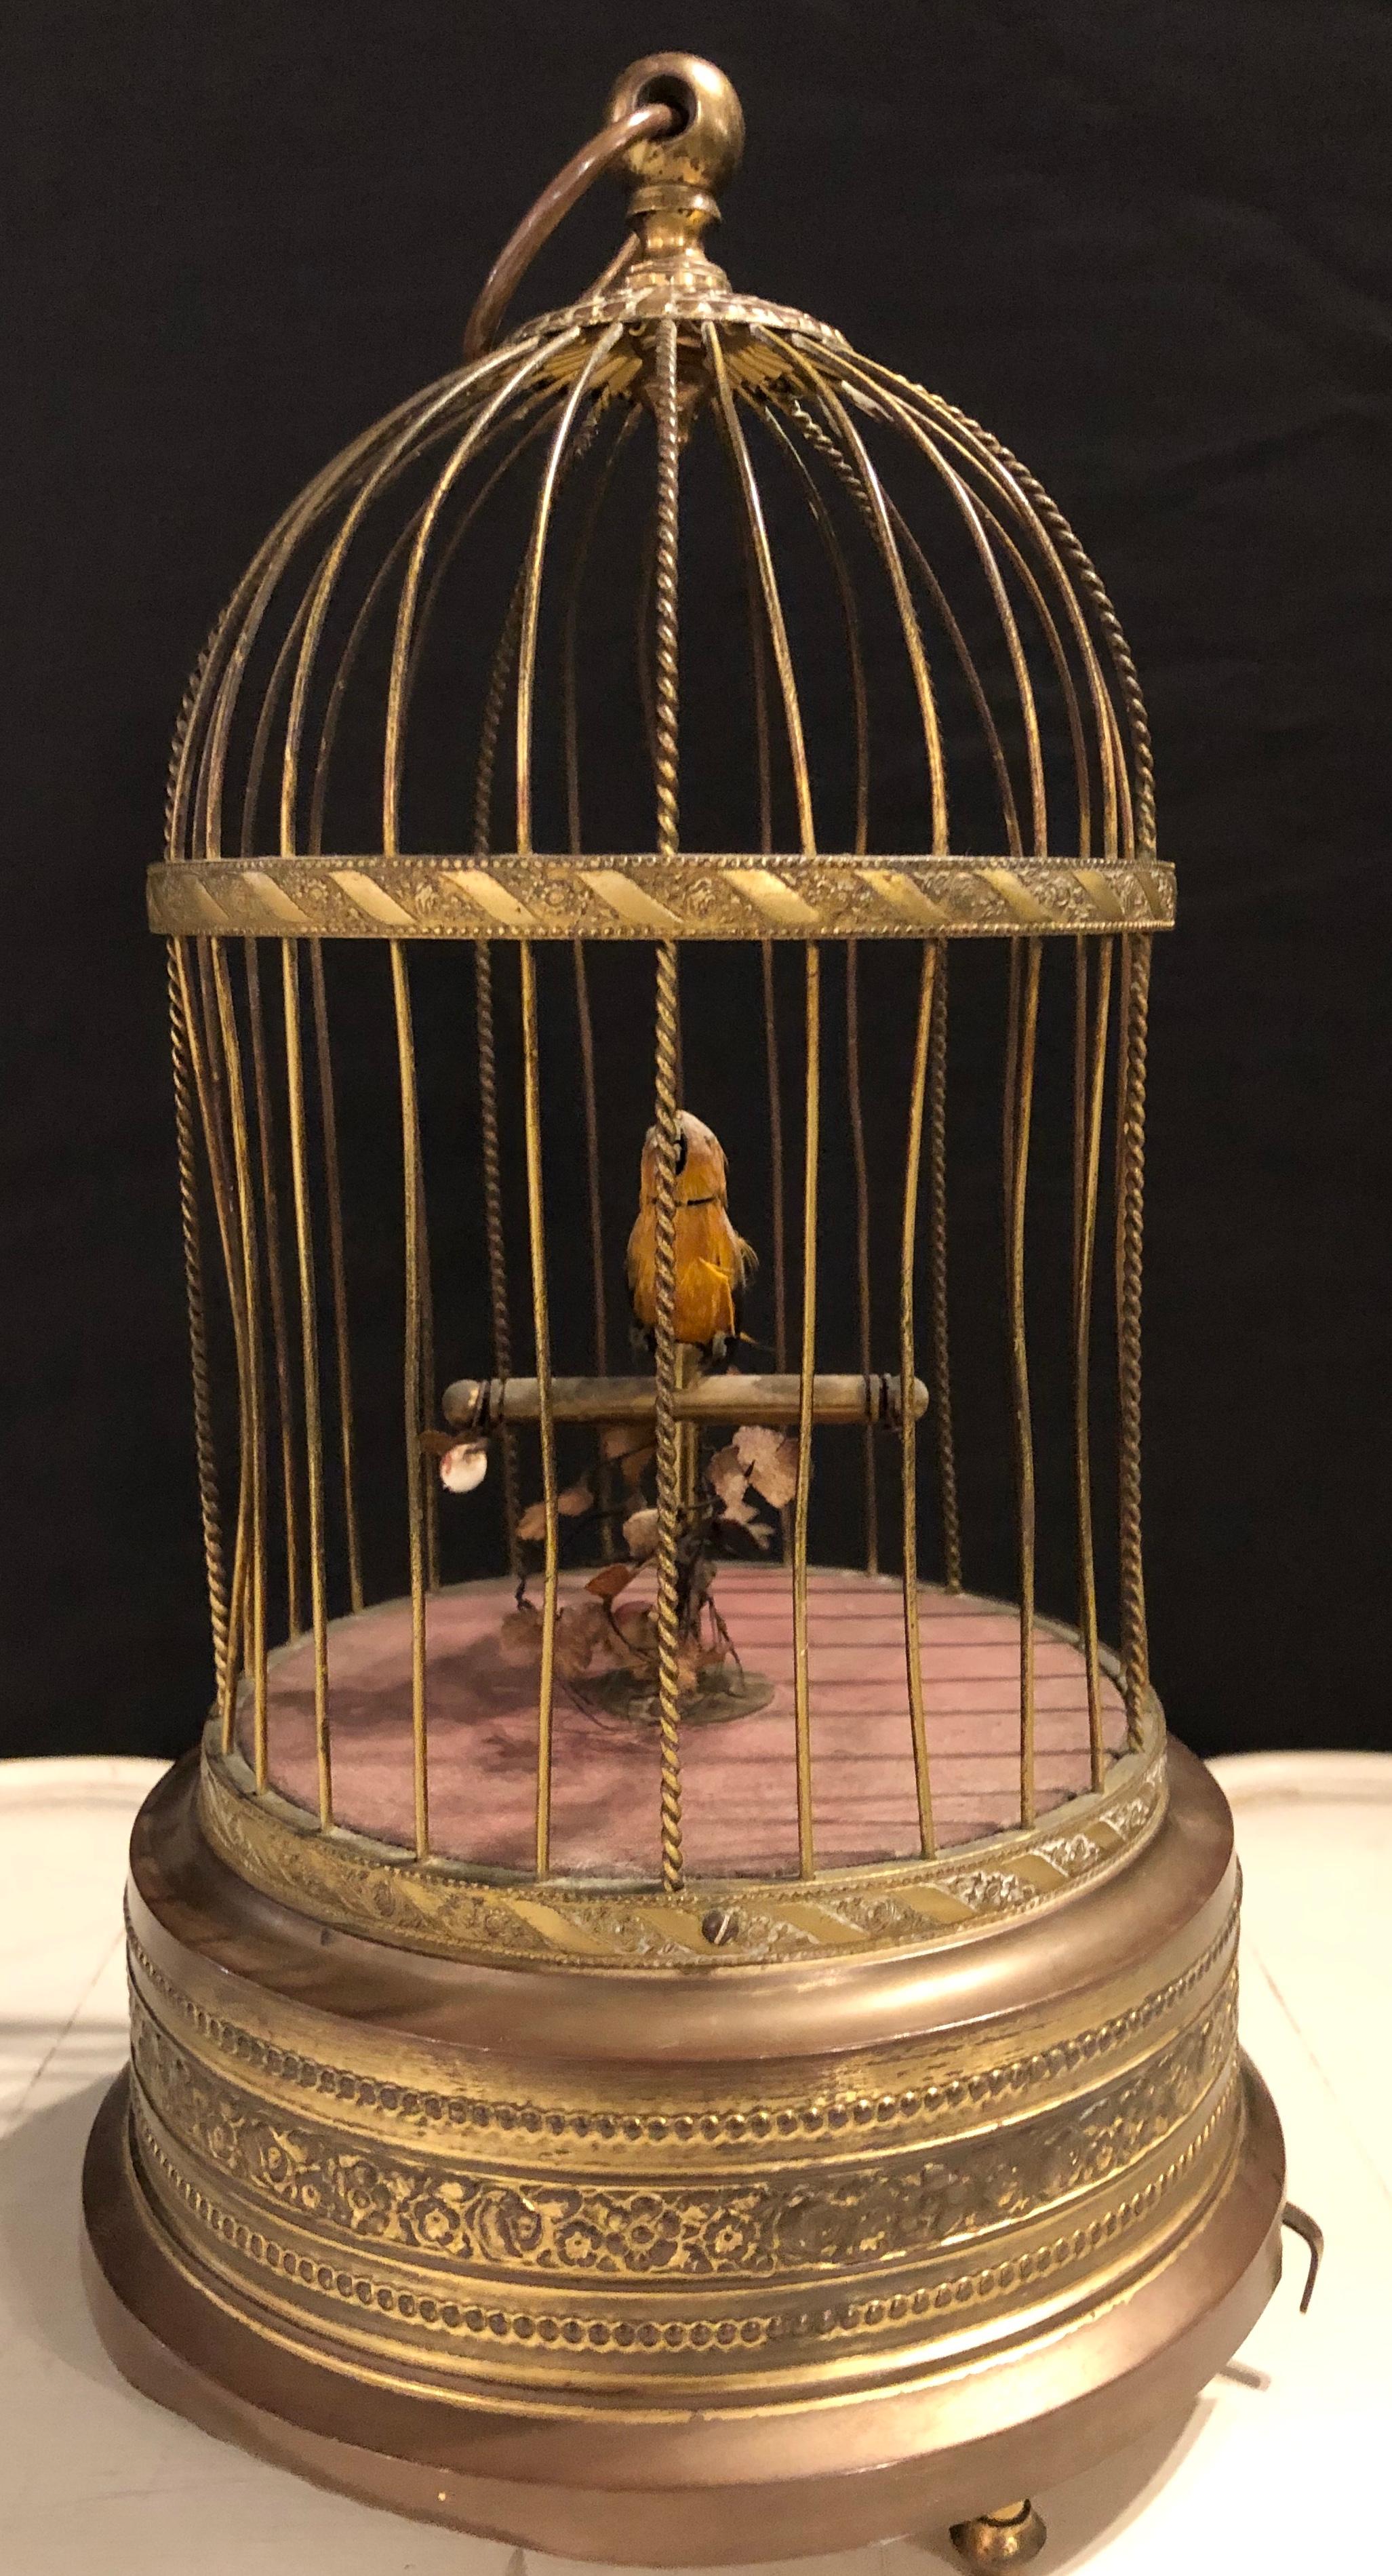 Antique German singing bird music box marked underside K.G Karl. At the time of this listing the bird chirps and sings wonderfully when you wind her up.
IZS.